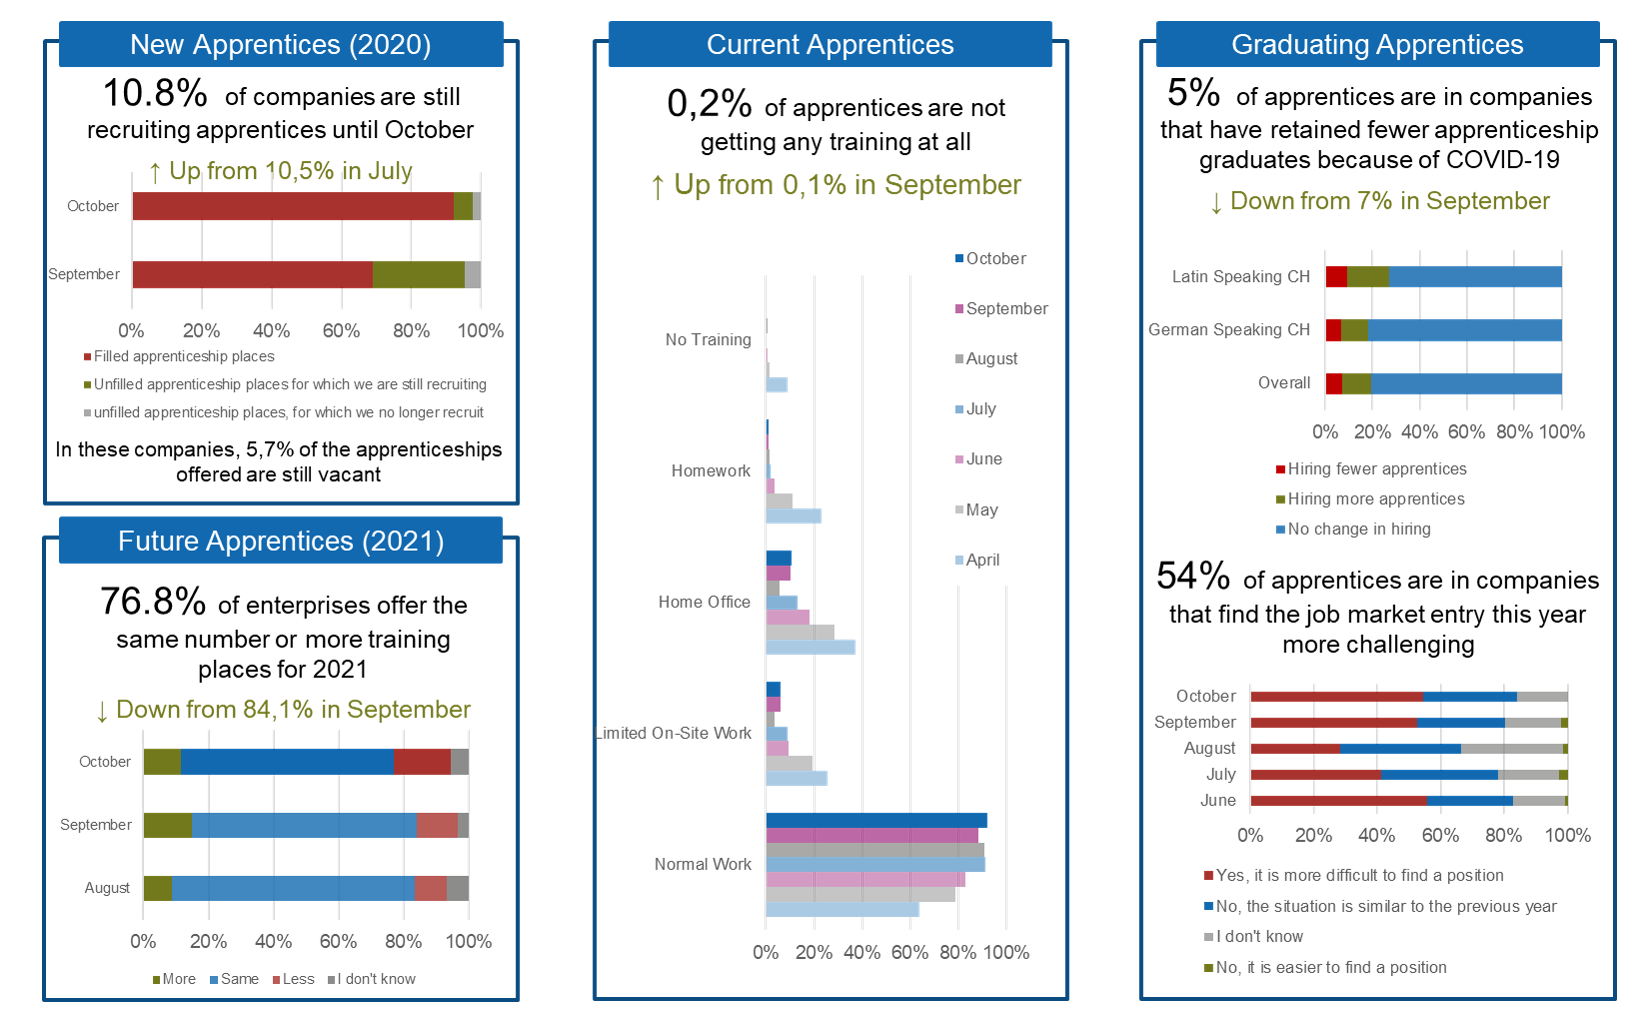 Enlarged view: The Pulse of Apprentices in October 2020 – Main Points